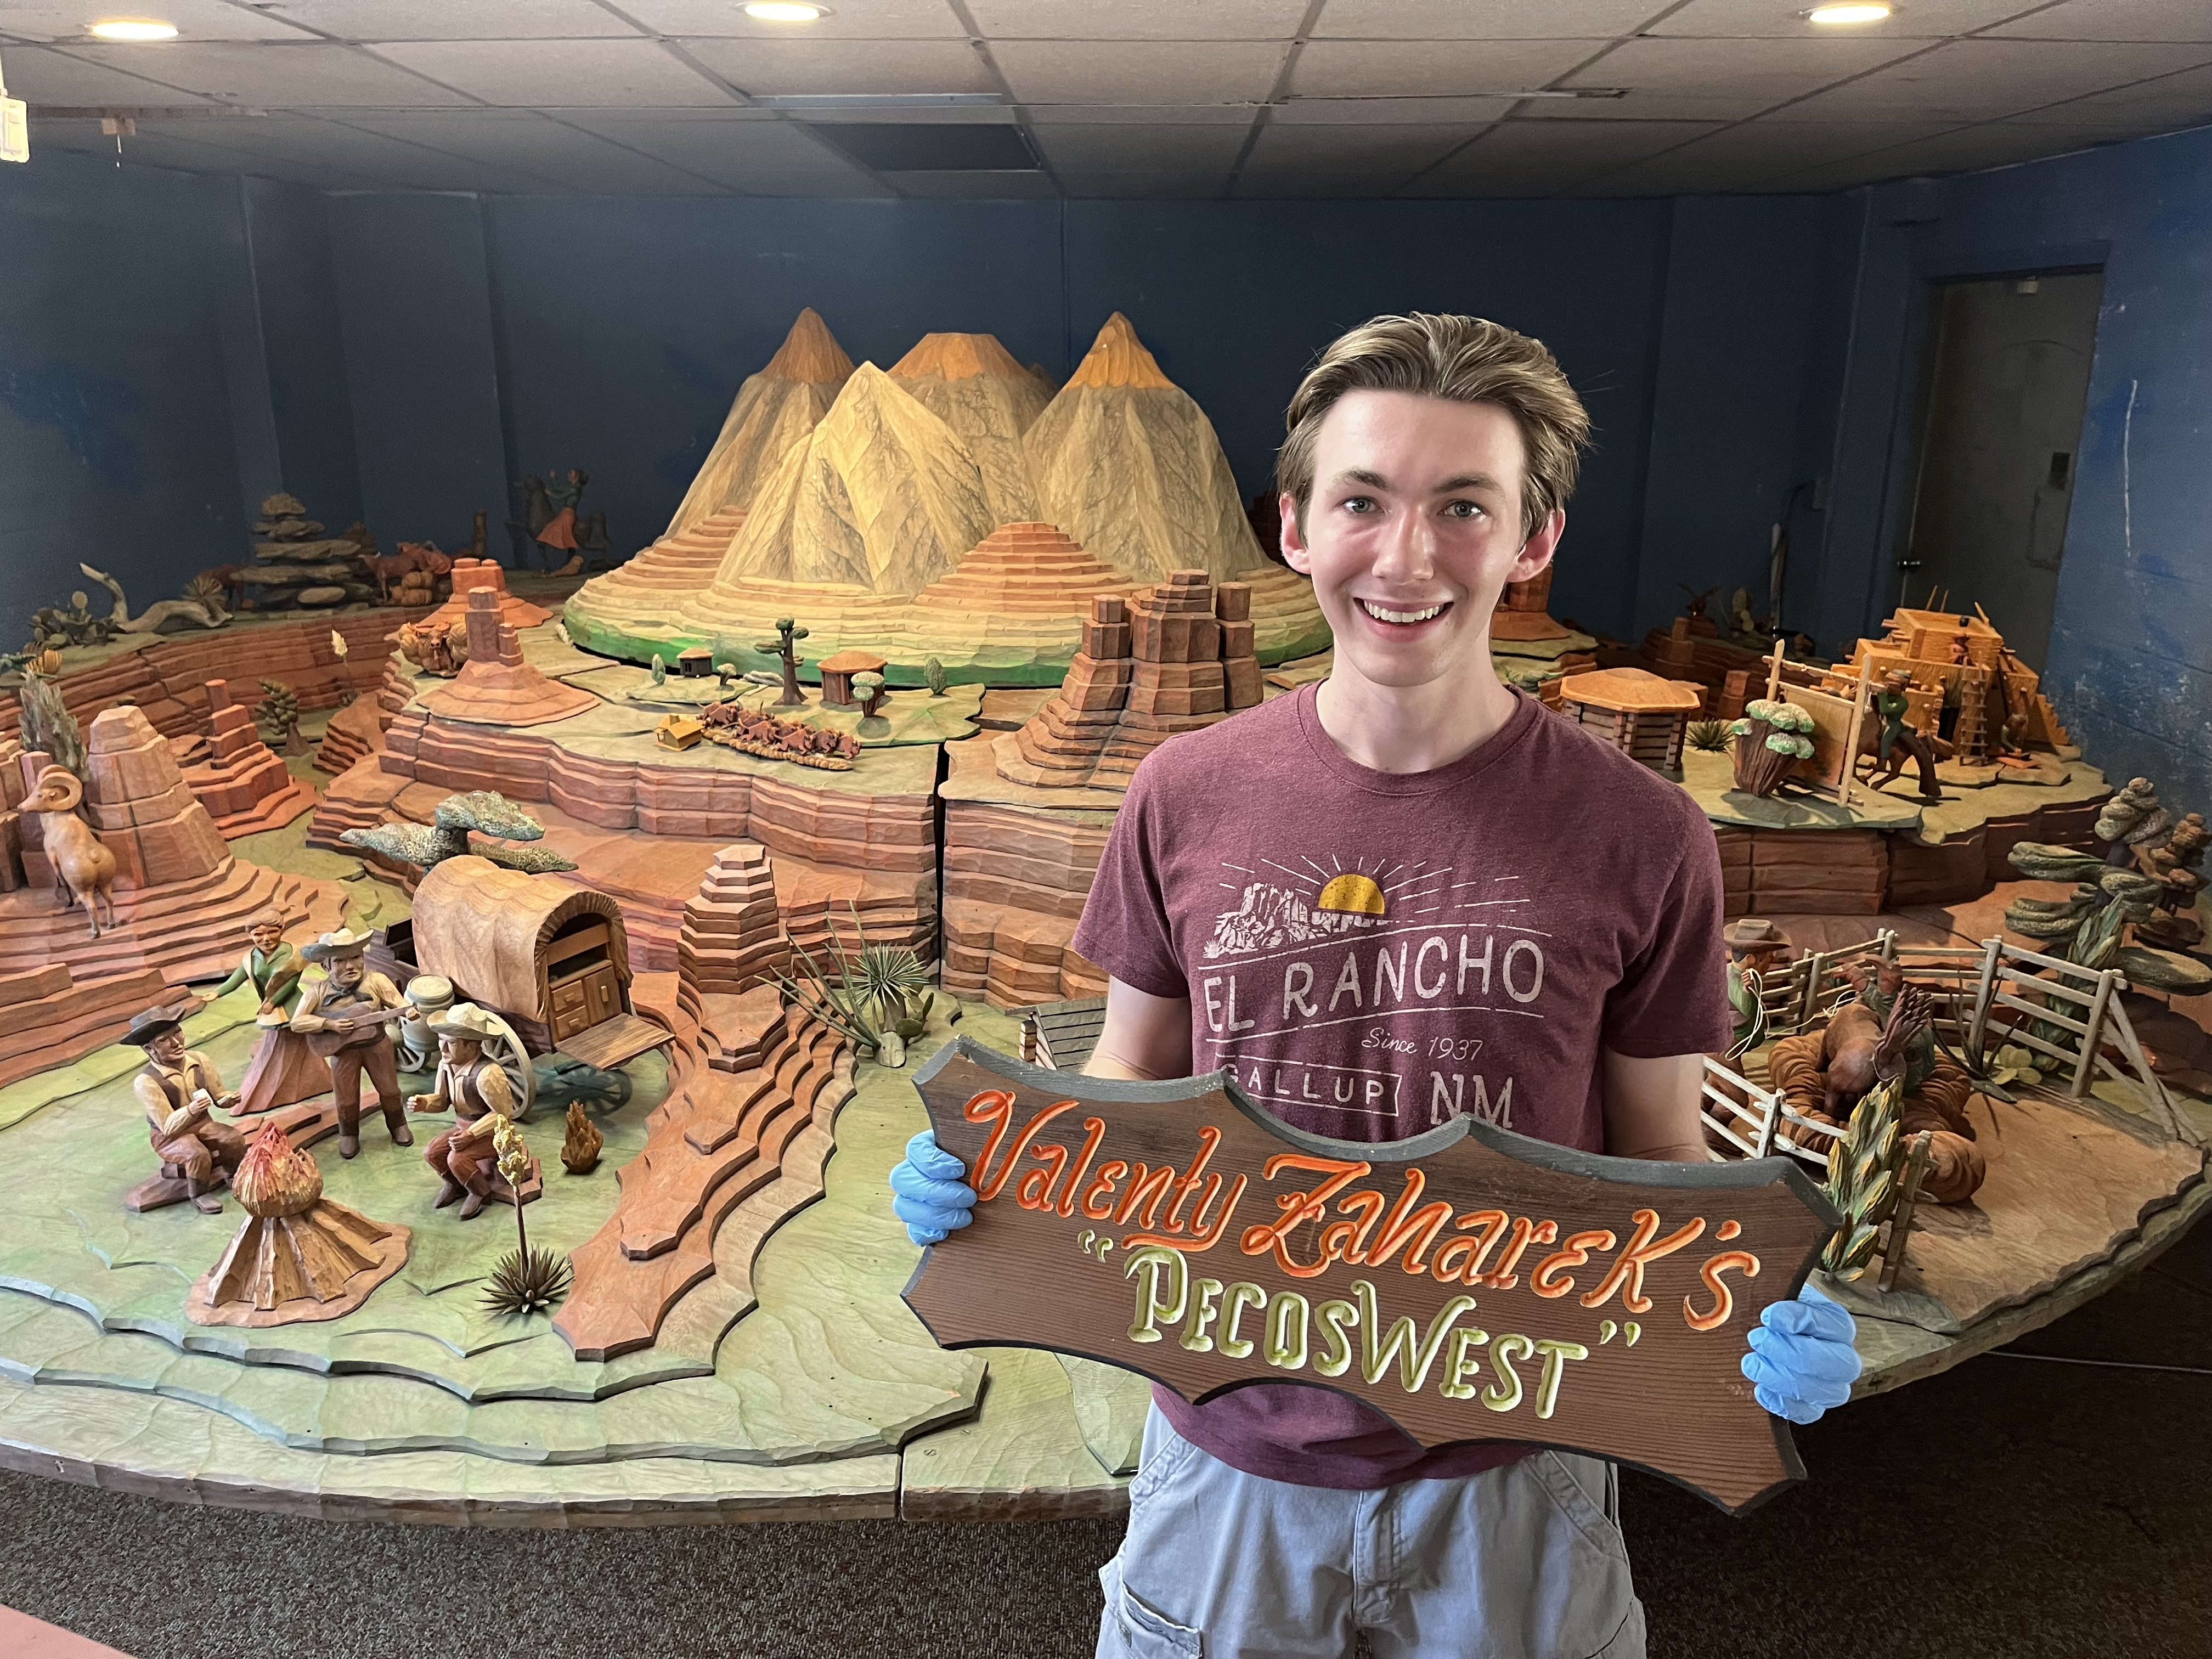 Jacob Monninger ’24 with one of his favorite museum features, the Pecos West. The cyclorama is a rotating panoramic scene reflecting artist Valenty Zaharek’s view of the Wild West, assembled from redwood, aspen, and pine. It is 18 feet wide, with over 100 different wood carvings and weights over 3,000 pounds.